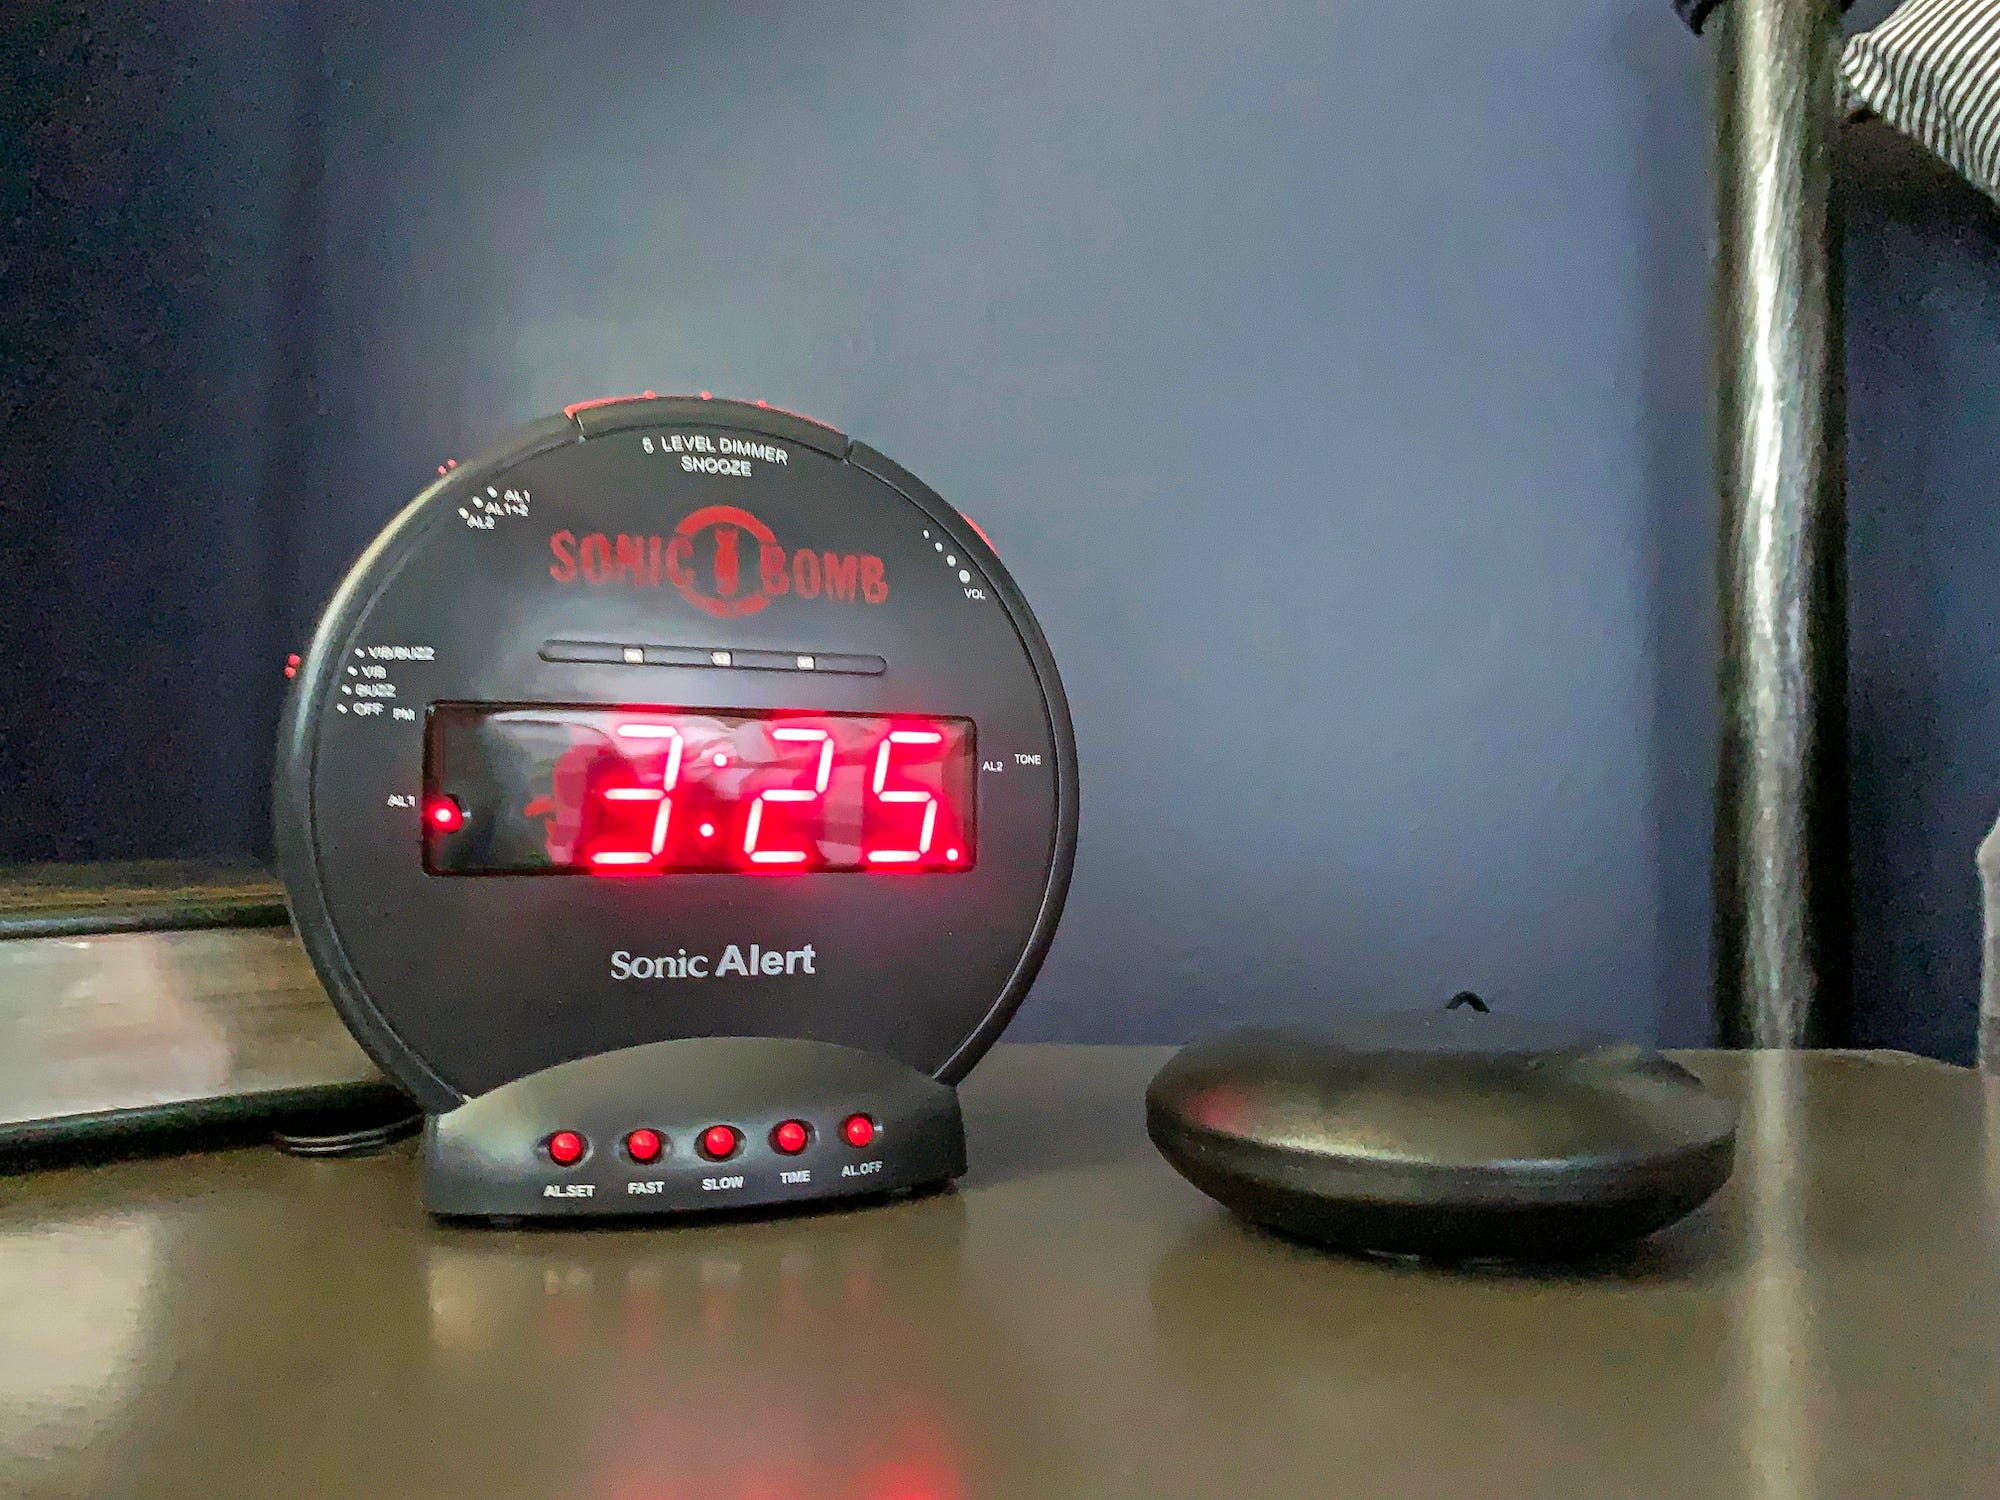 The Sonic Alert Sonic Bomb Dual Extra-Loud Alarm Clock with Bed Shaker sits on a nightstand and reads 3:25.